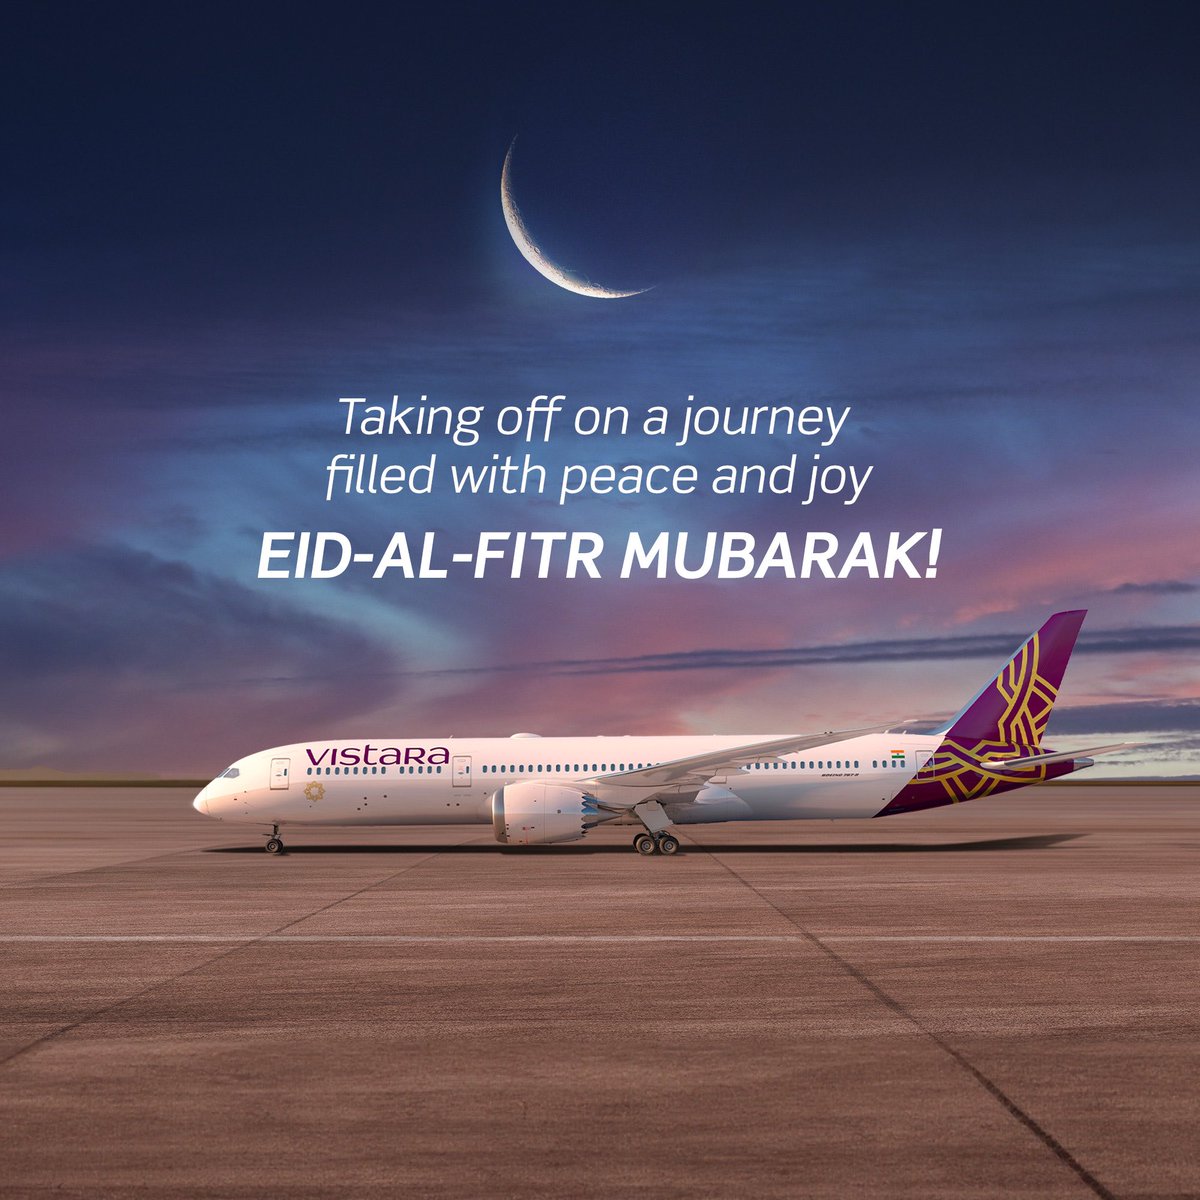 Let’s spread the wings of joy and fly towards togetherness. Wishing you a very happy Eid-al-Fitr! #EidMubarak